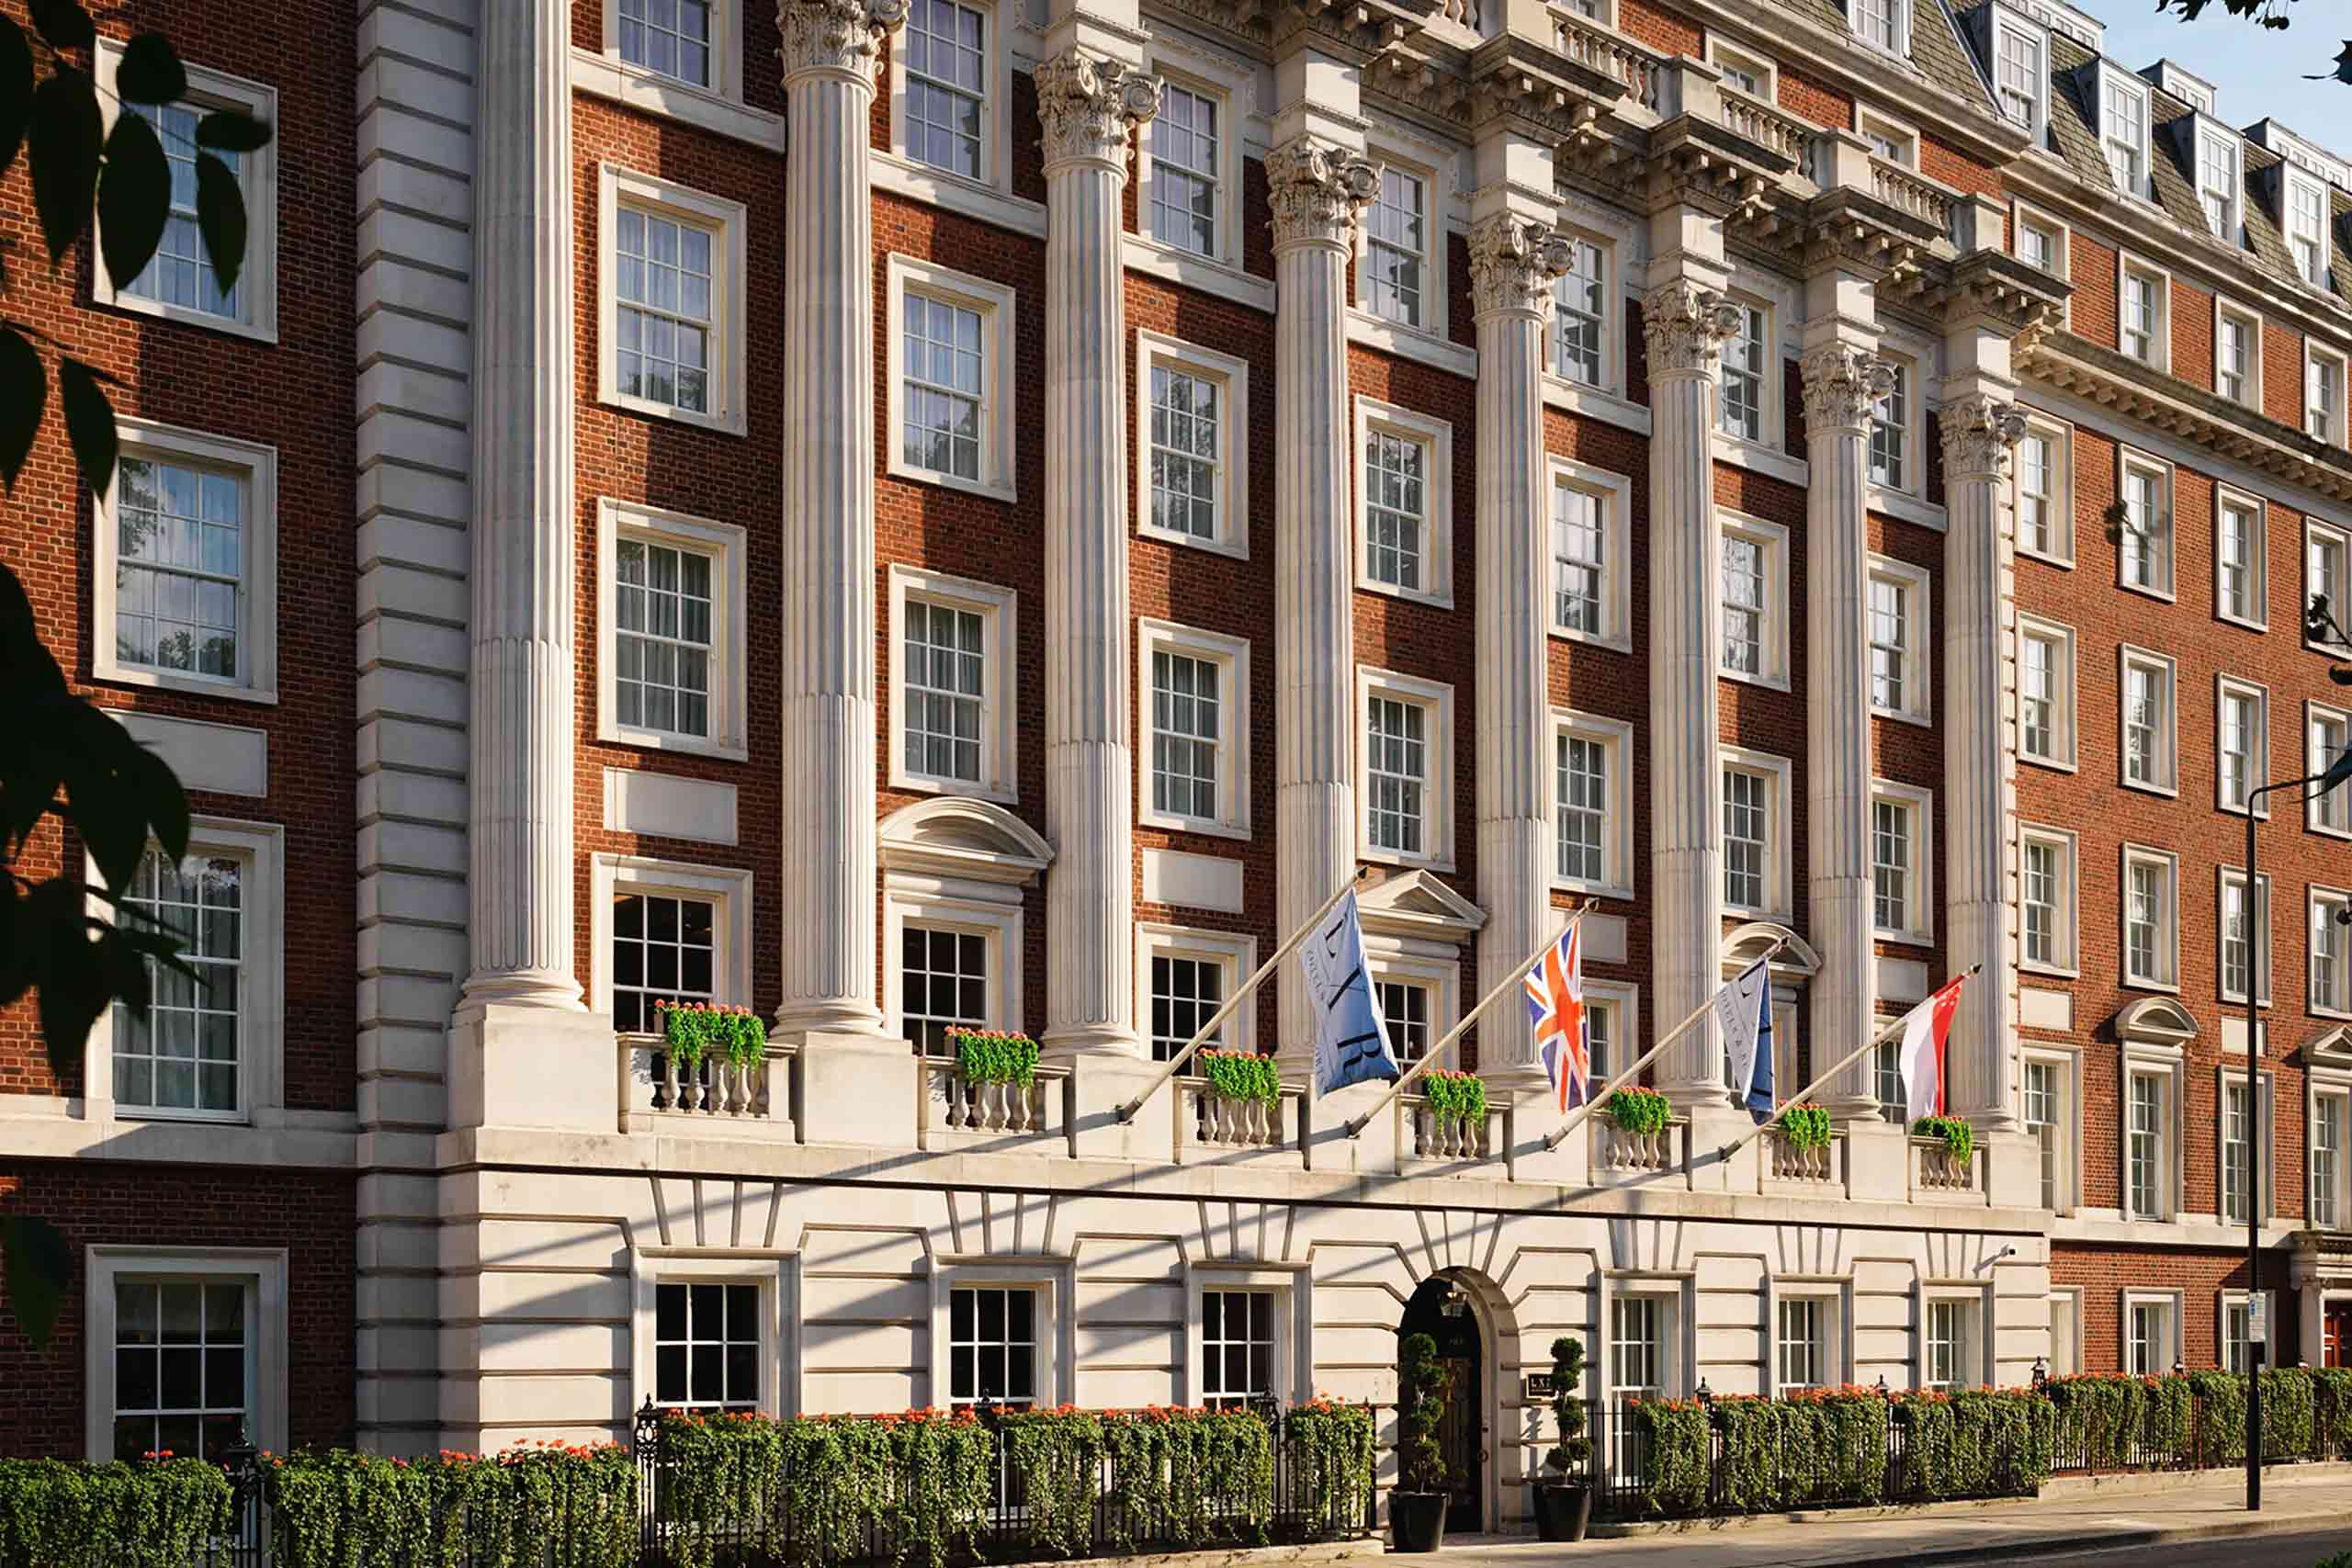 Front of The Biltmore Mayfair, London a Hilton LXR hotels property